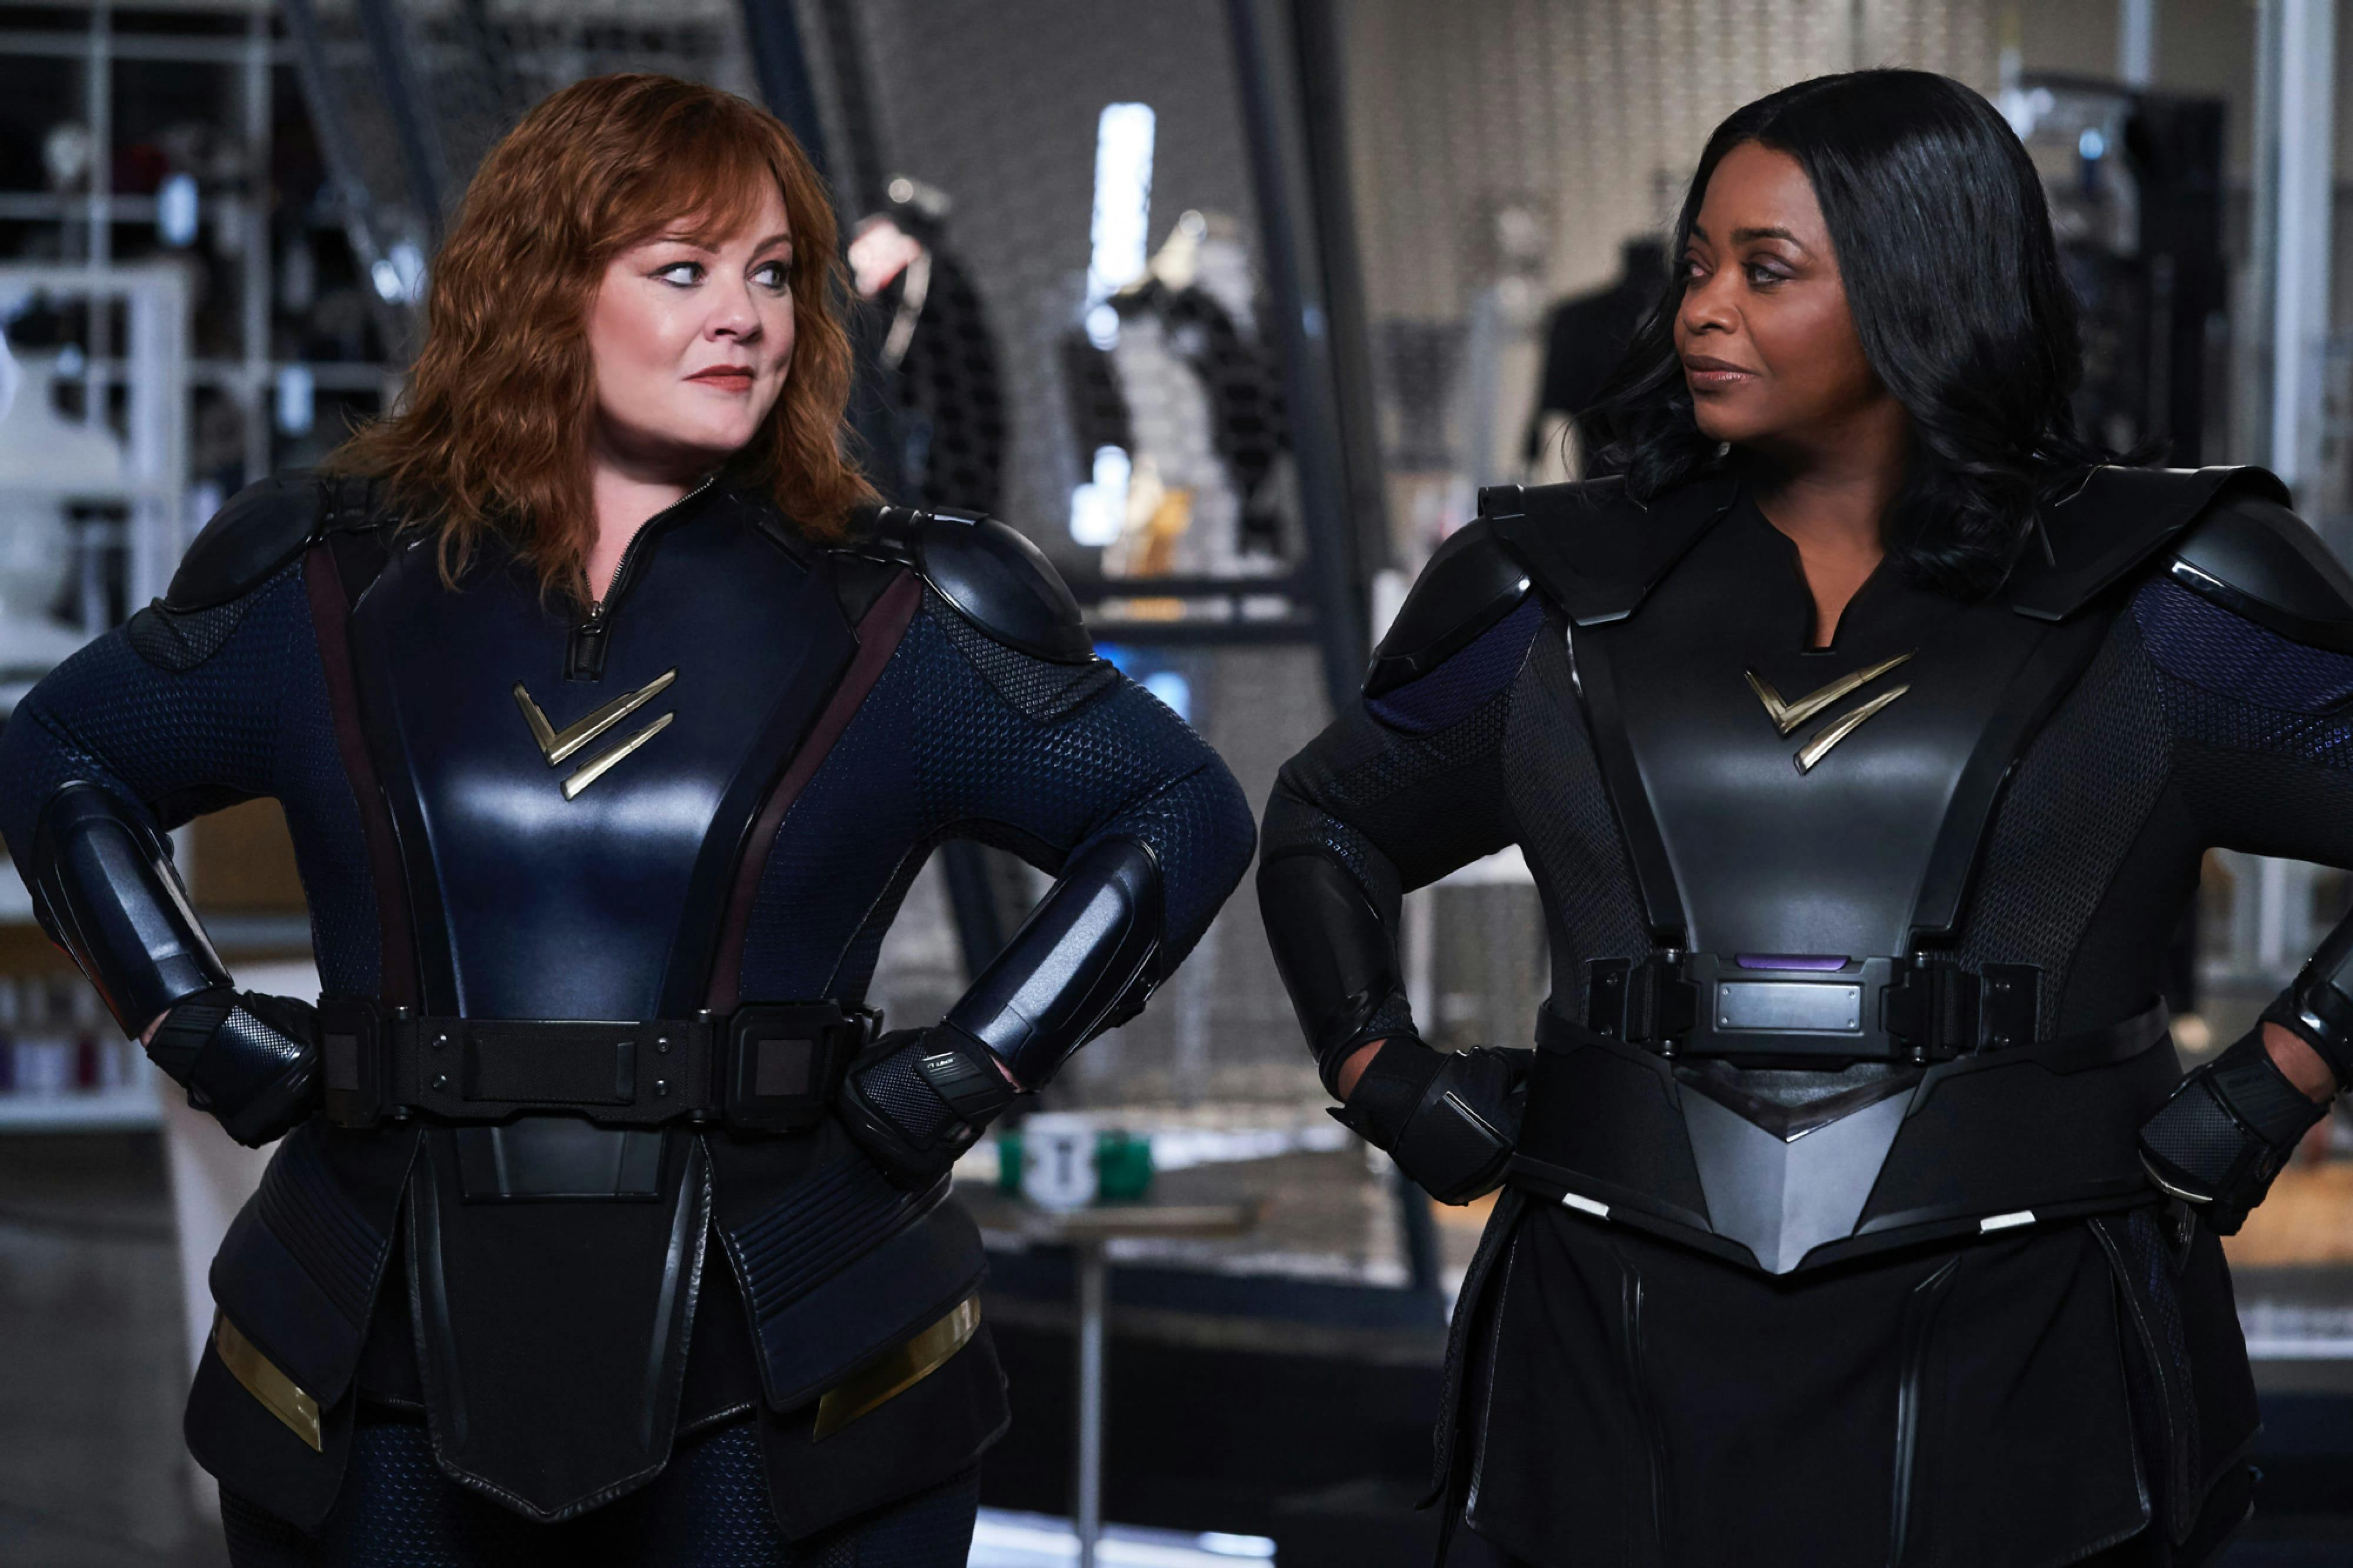 Clad in intimidating yet chic superhero suits, Melissa McCarthy and Octavia Spencer stand with their hands on hips looking at each other. They look like they could save the world!